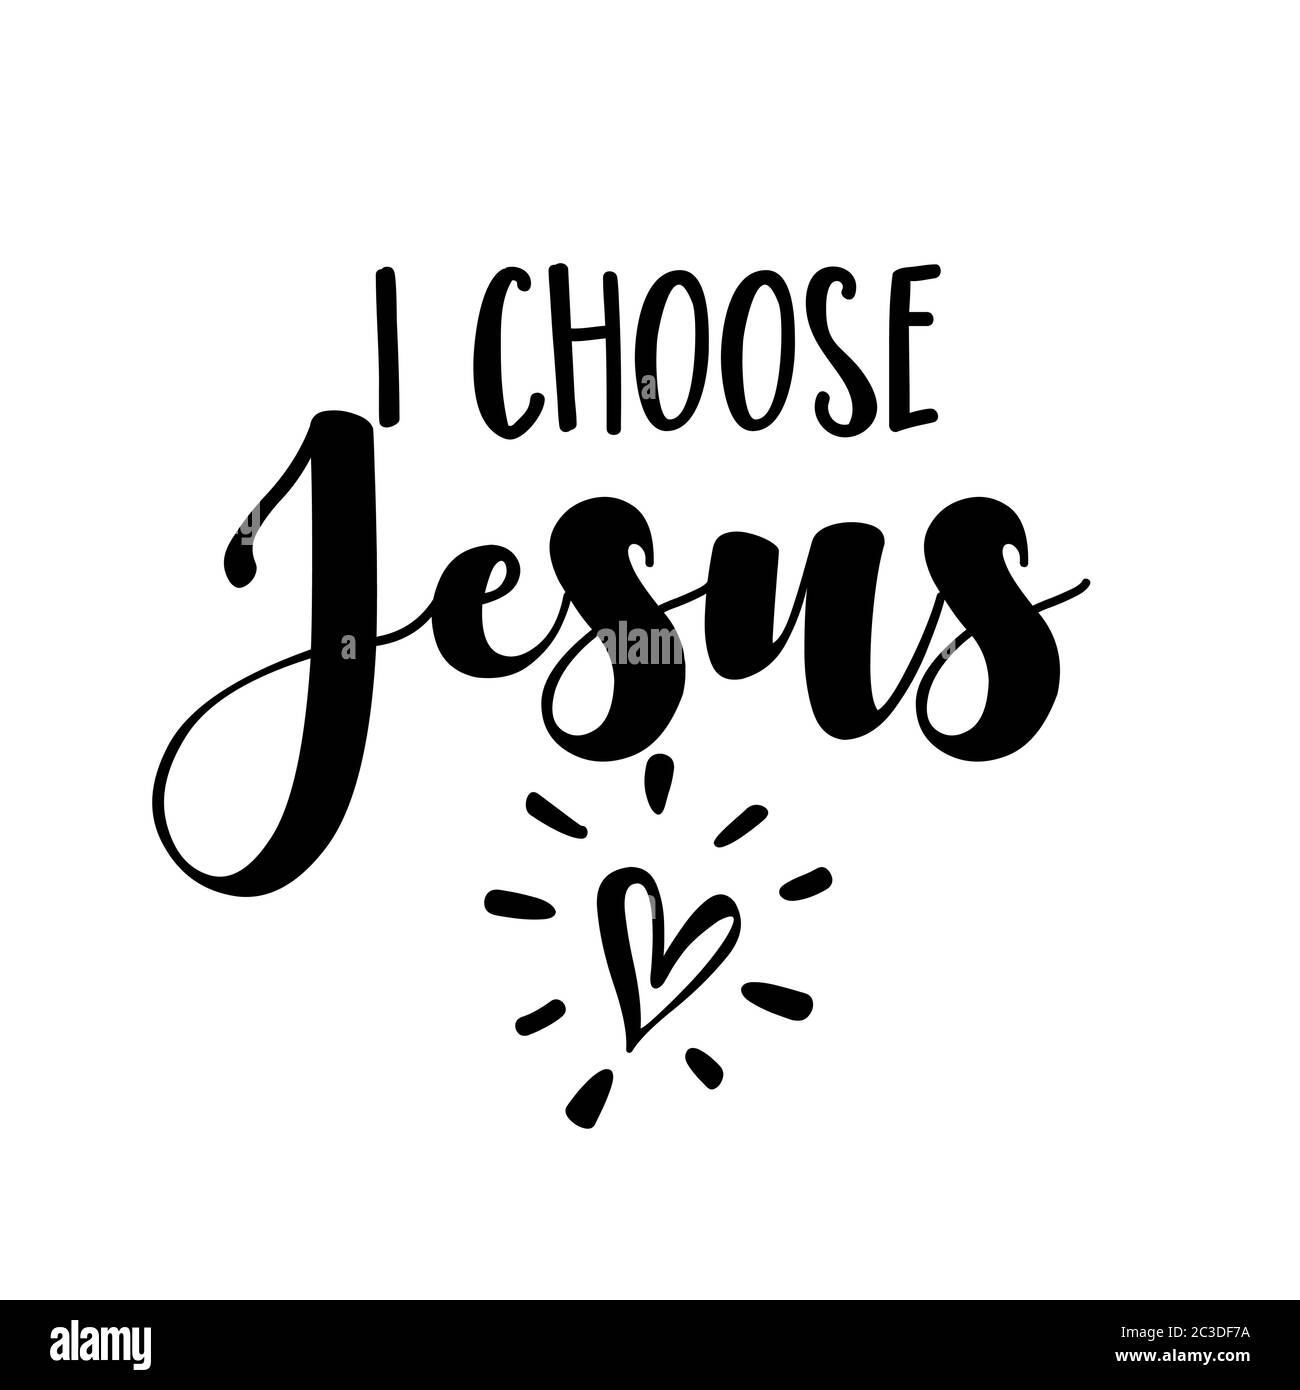 I choose Jesus - Hand written Vector calligraphy lettering text Christianity quote for design. Typography poster. Stock Vector